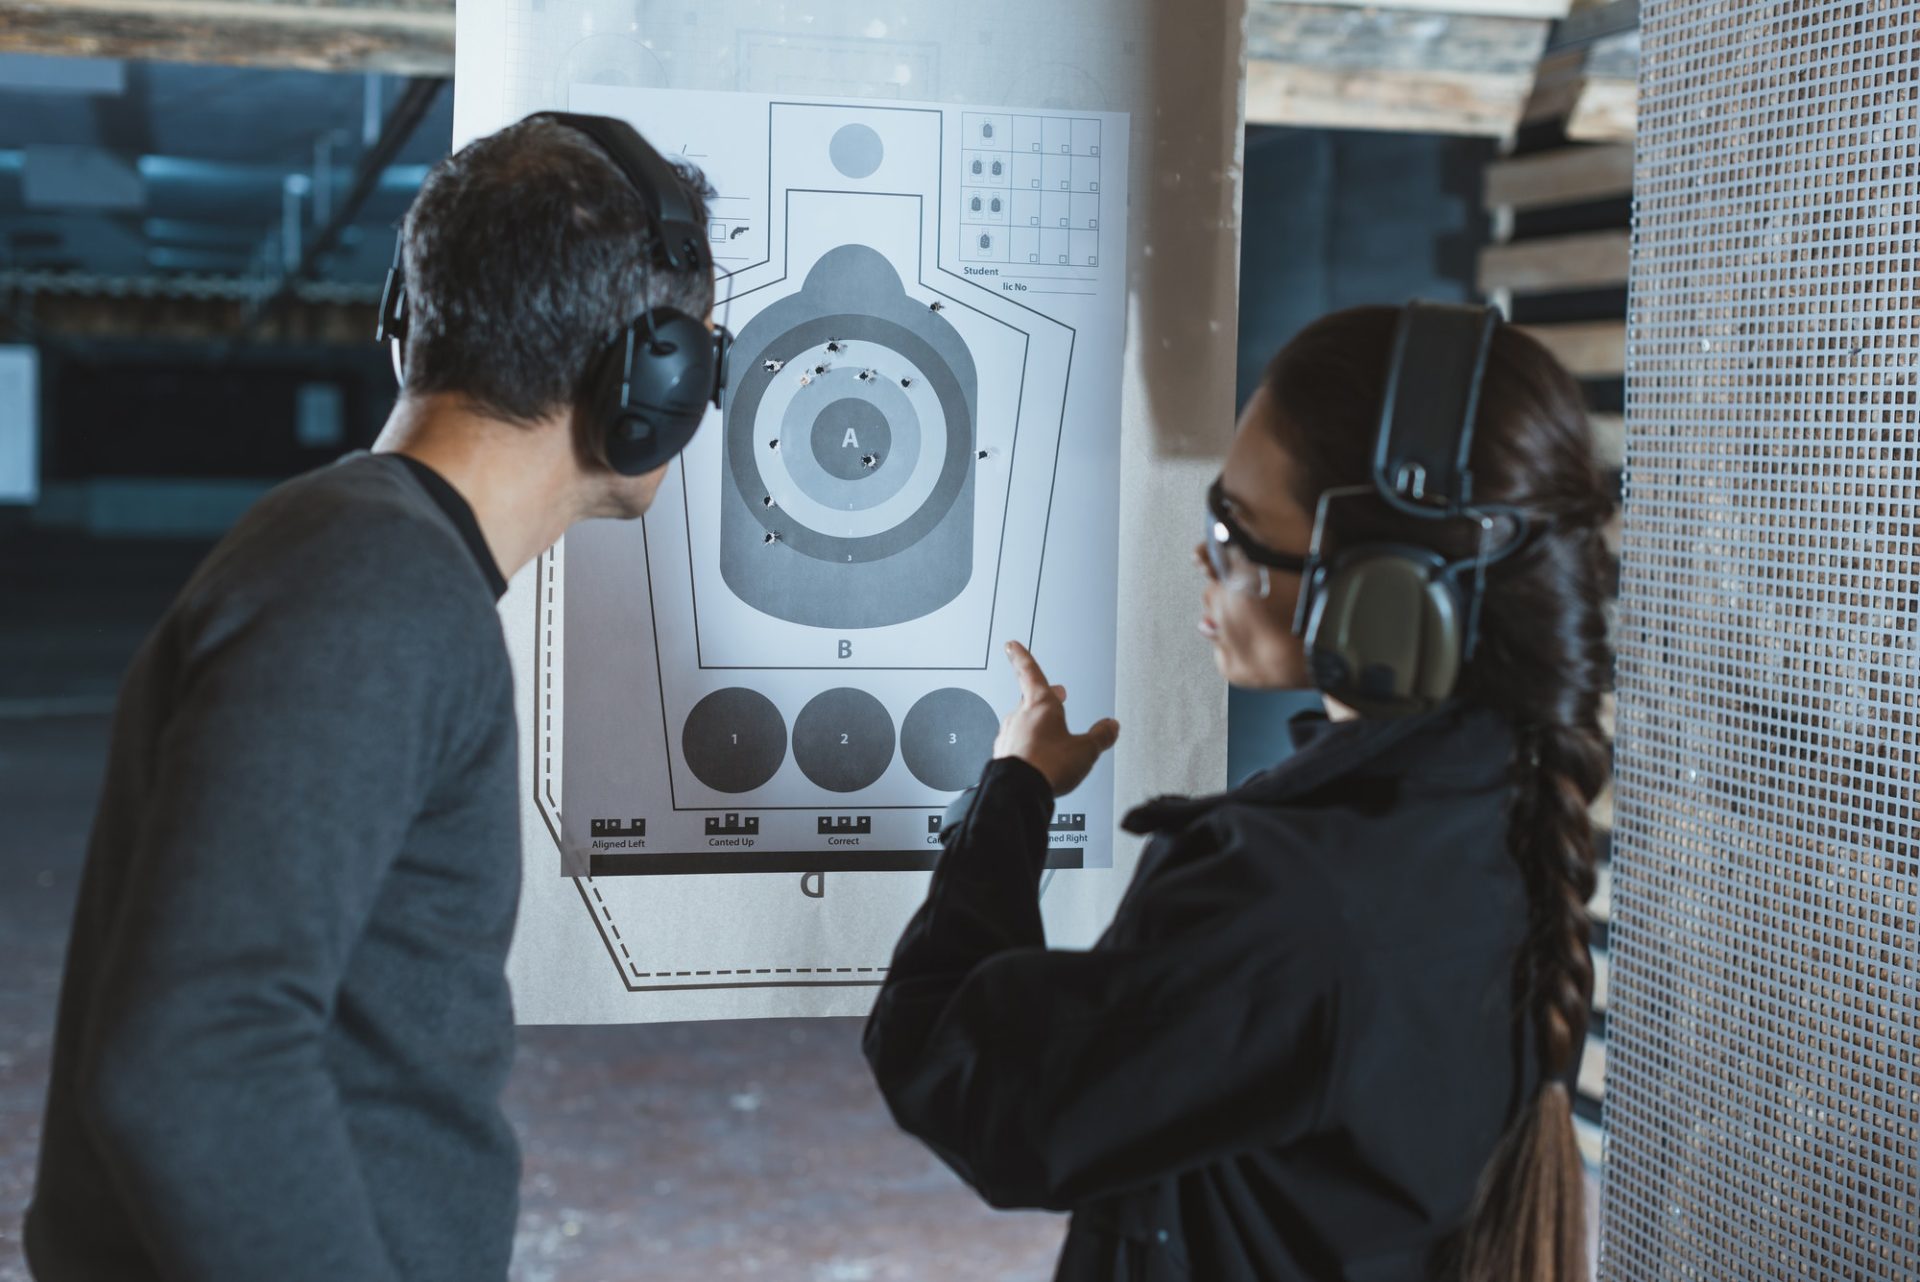 shooting instructor pointing on used target in shooting range